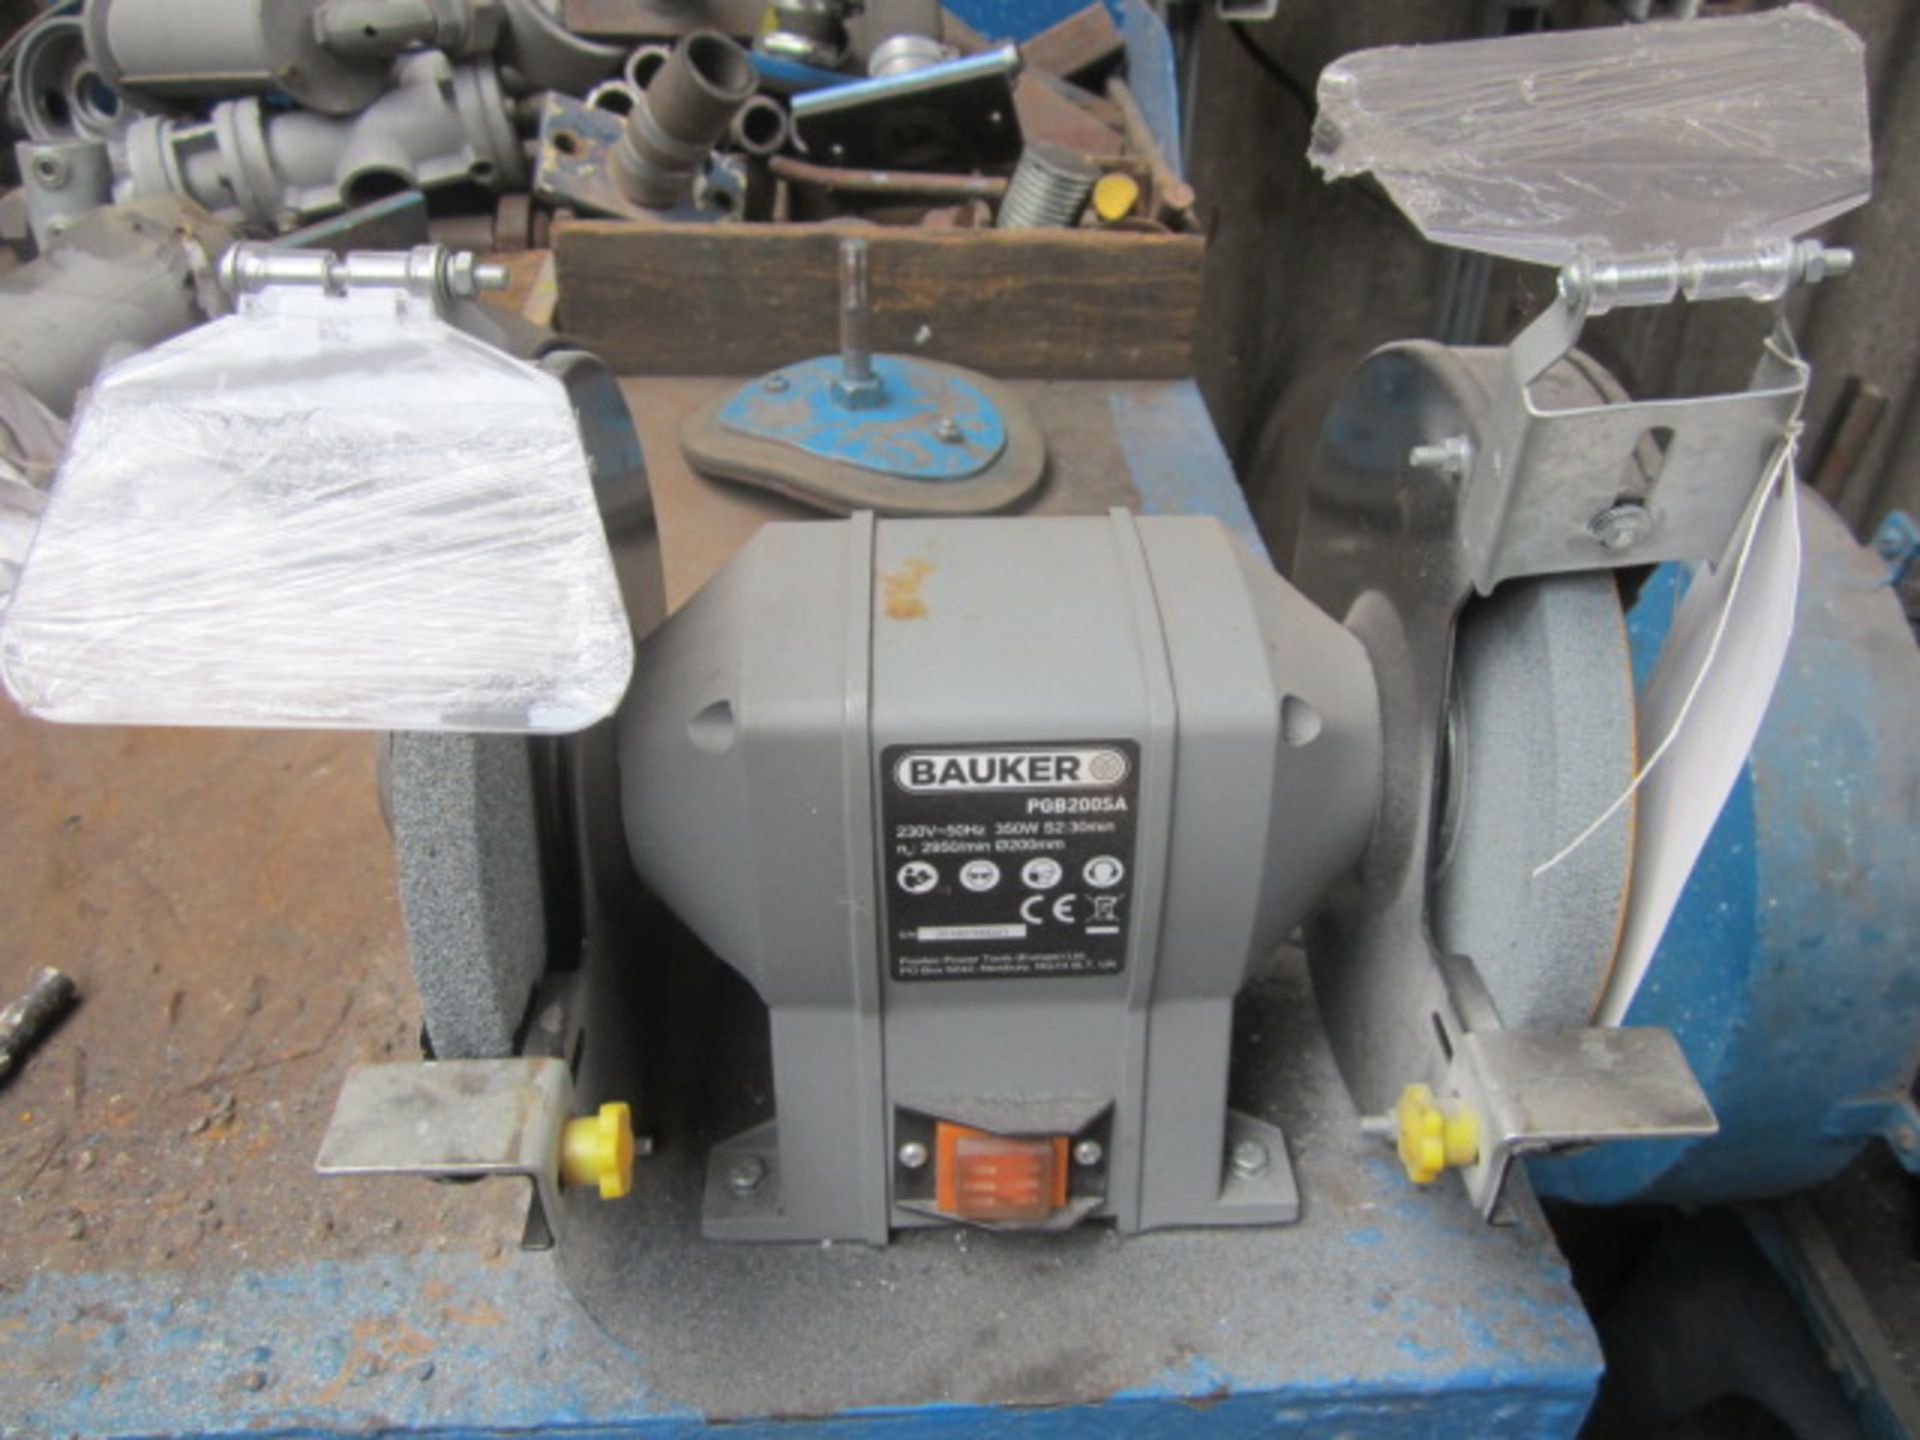 Baucker PGB2005A double ended bench grinder, serial no. 20192100021